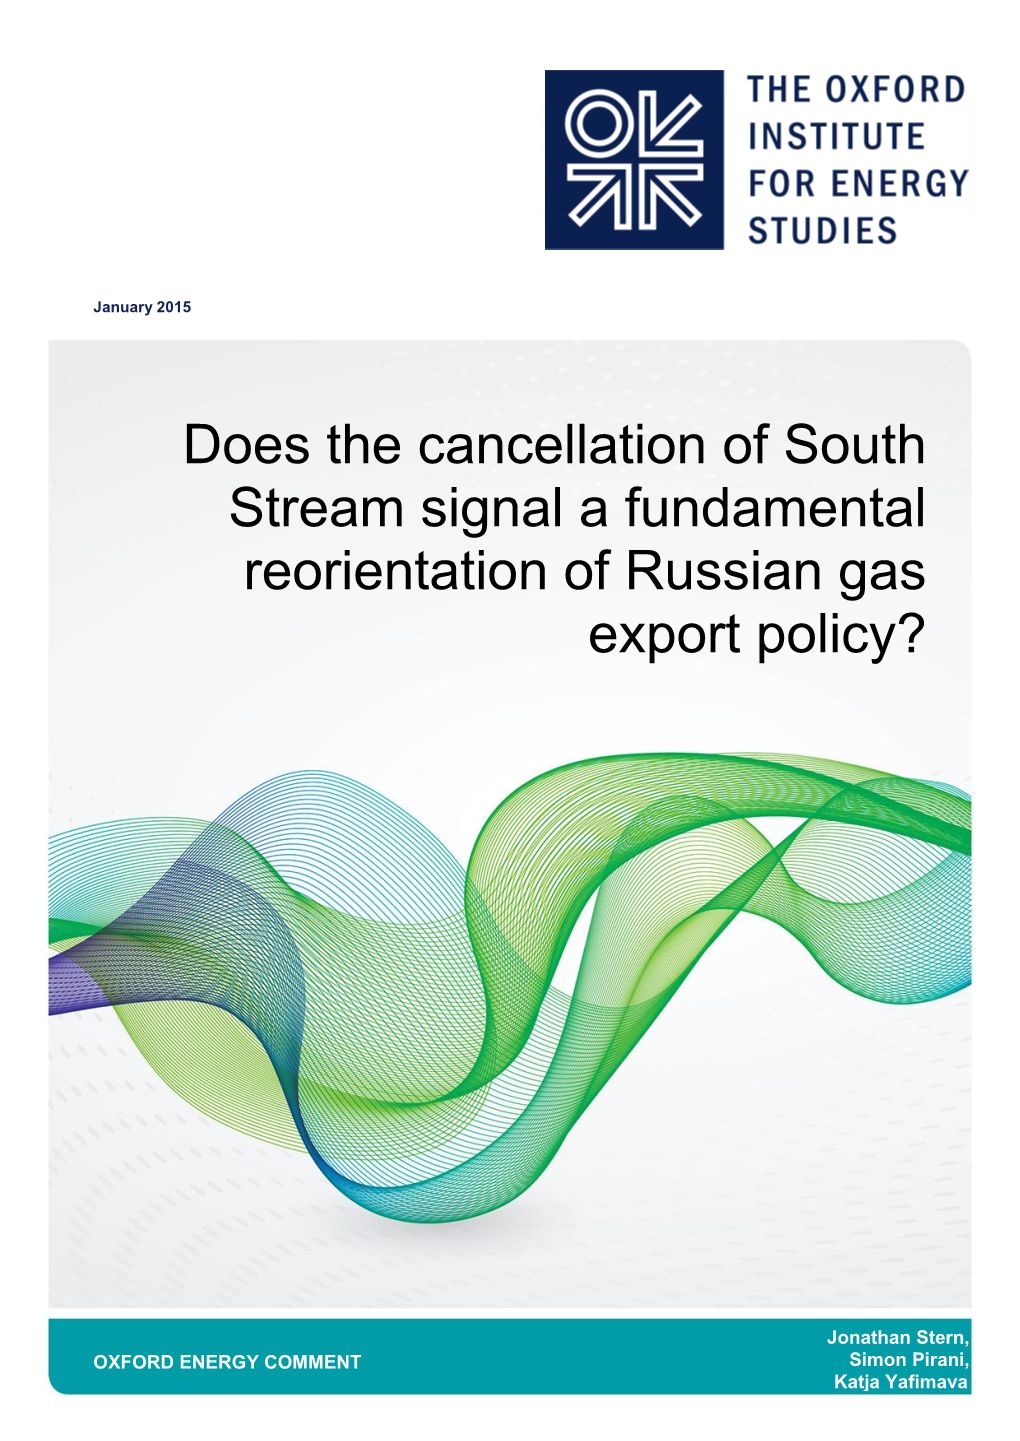 Does the Cancellation of South Stream Signal a Fundamental Reorientation of Russian Gas Export Policy?